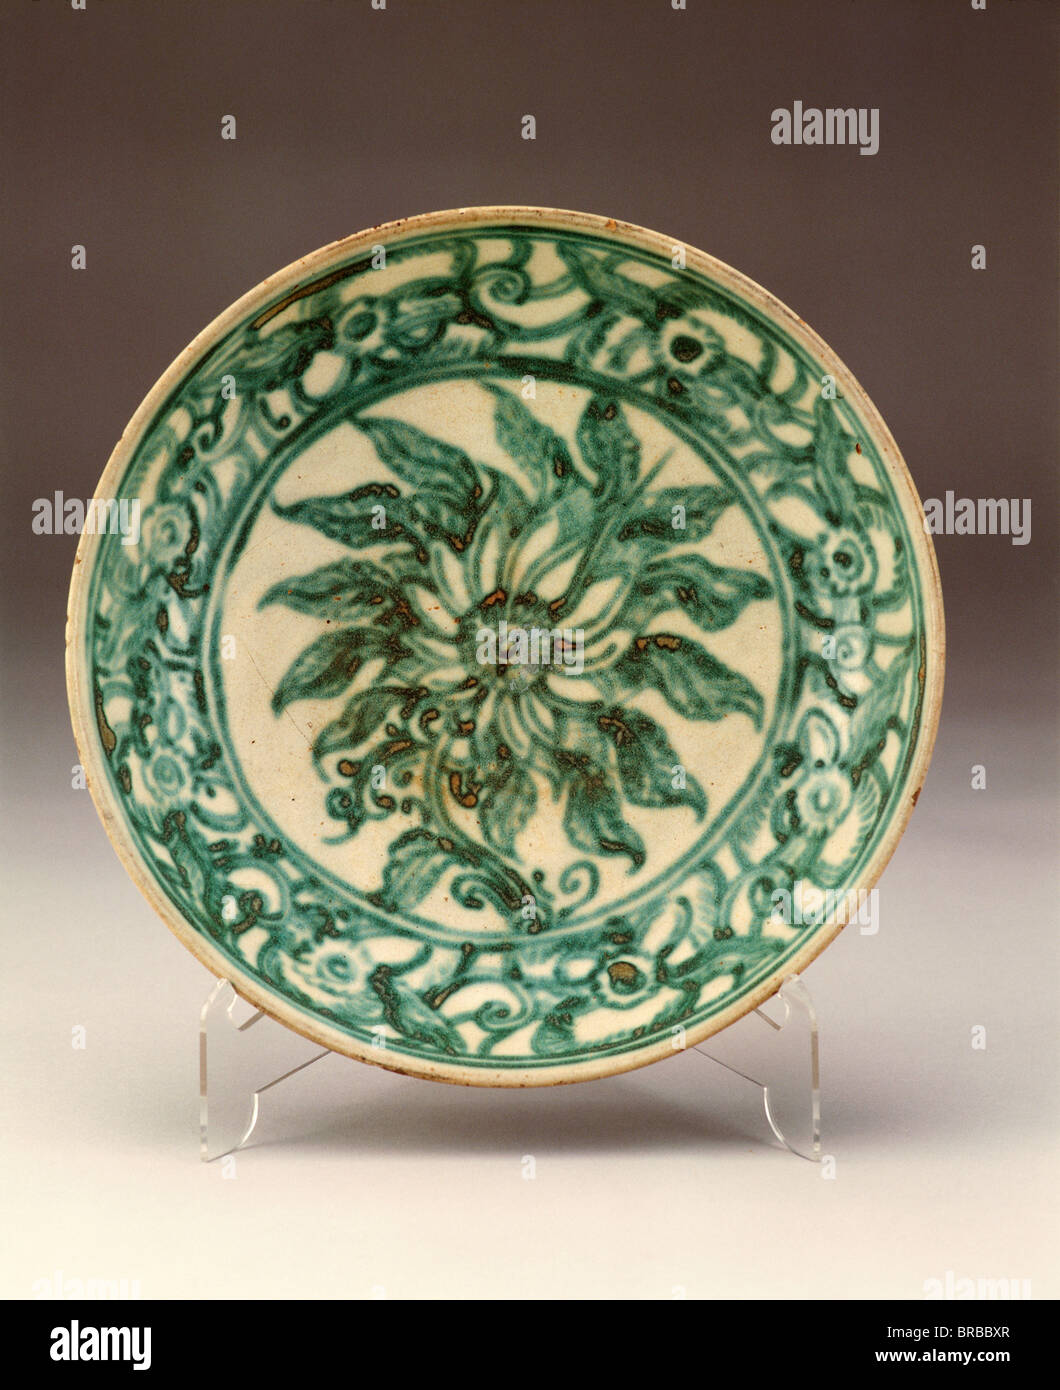 Burmese glazed ceramic plate dating from the 15th or 16th century from the Tak excavations, Myanmar (Burma) Stock Photo